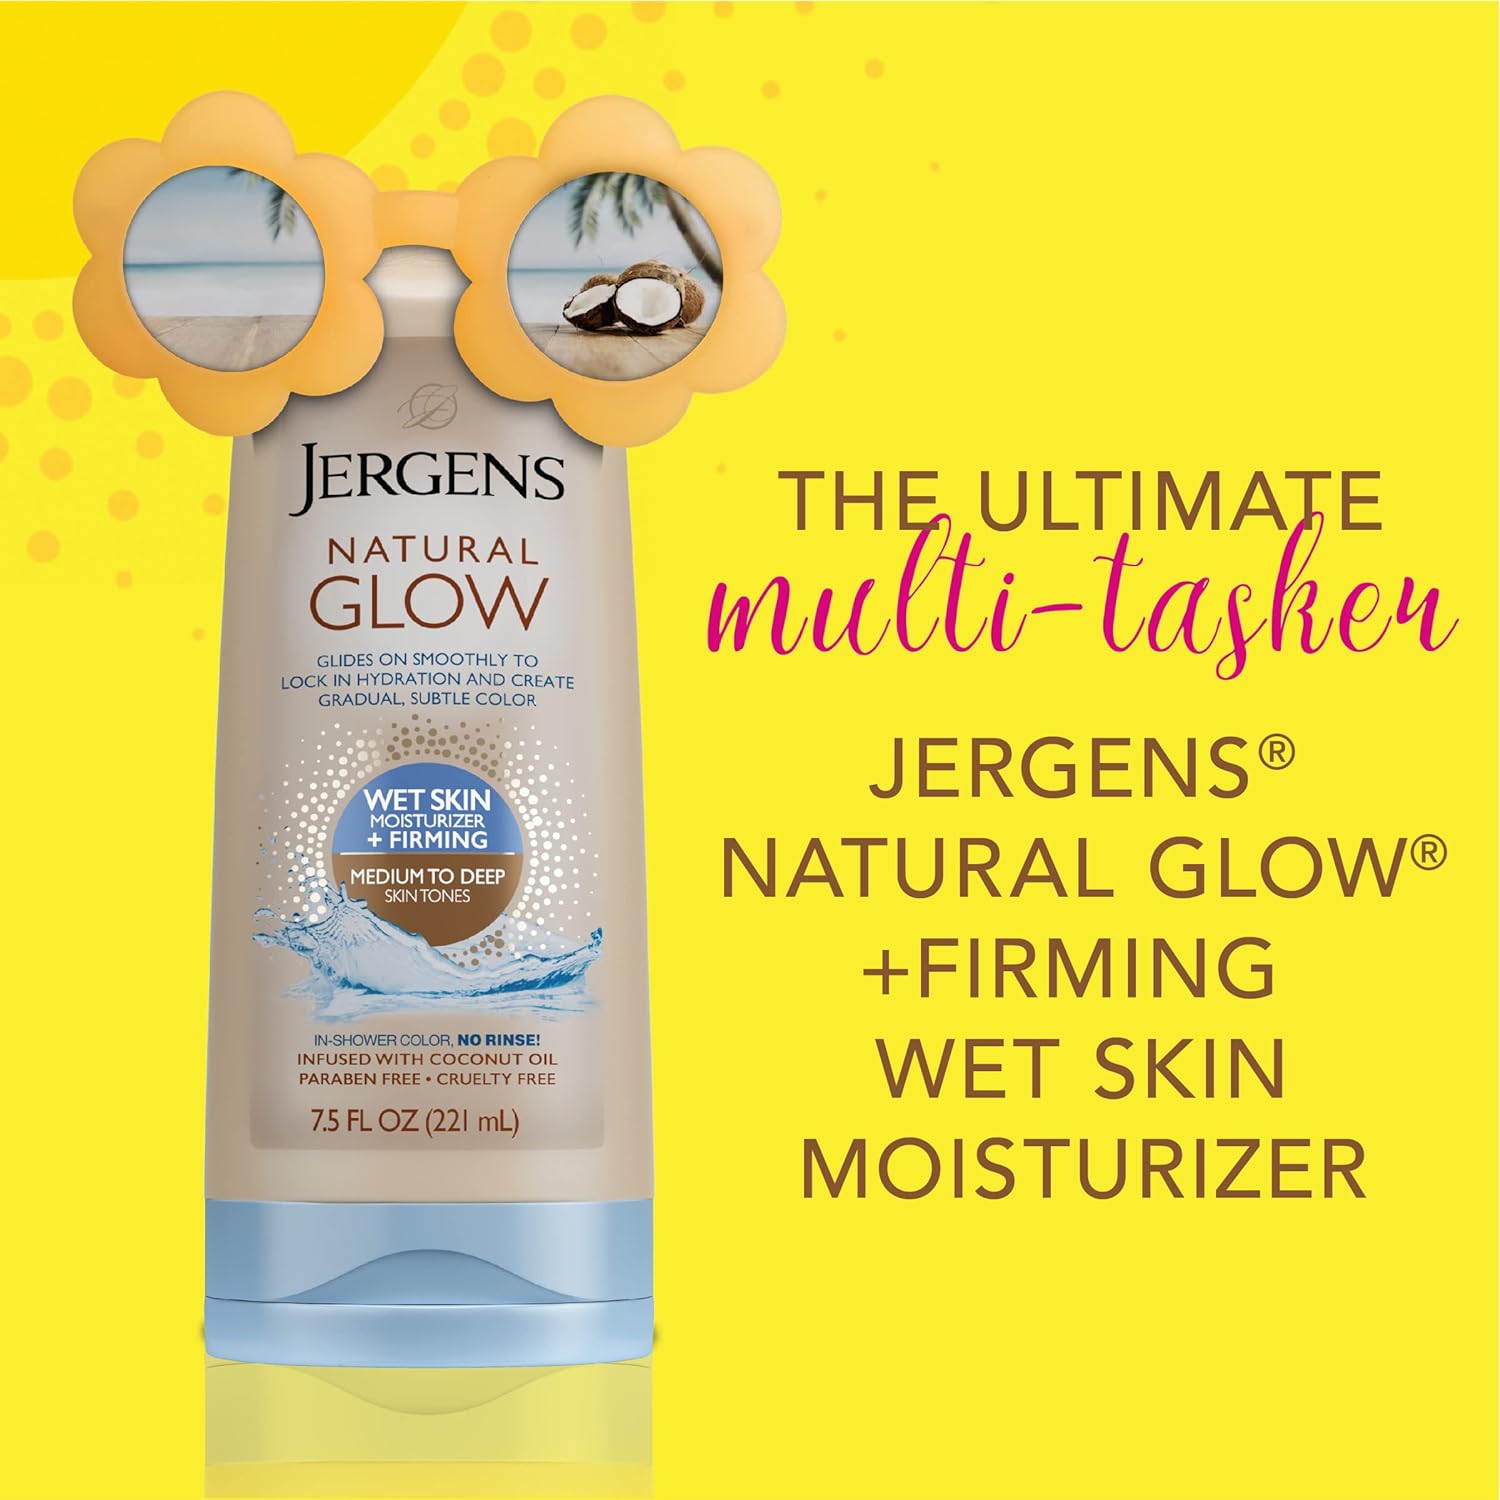 Jergens Natural Glow +FIRMING In-shower Self Tanner Body Lotion, Sunless Tanning for Medium to Tan Skin Tone, Anti Cellulite Firming Moisturizer, Gradual Fake Tan, 7.5 Ounce (Pack of 2) : Beauty & Personal Care